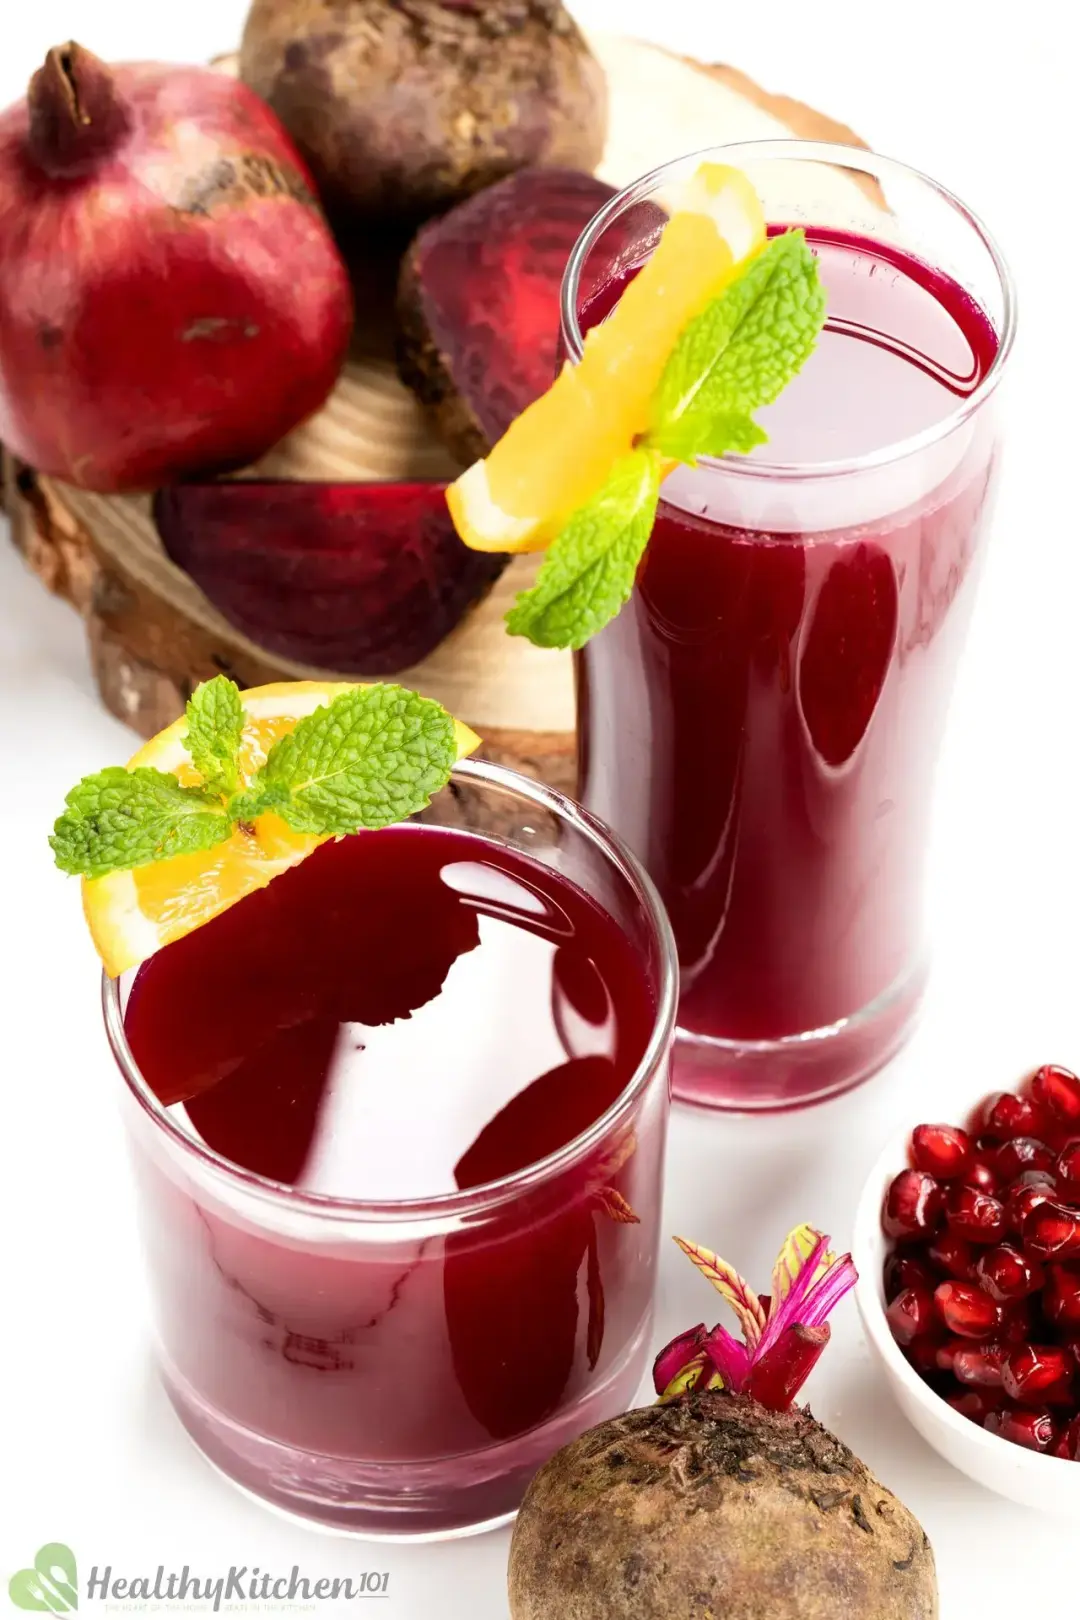 A short and a tall glass of beetroot juice, garnished with orange wedges and mints, next to pomegranates and beetroots